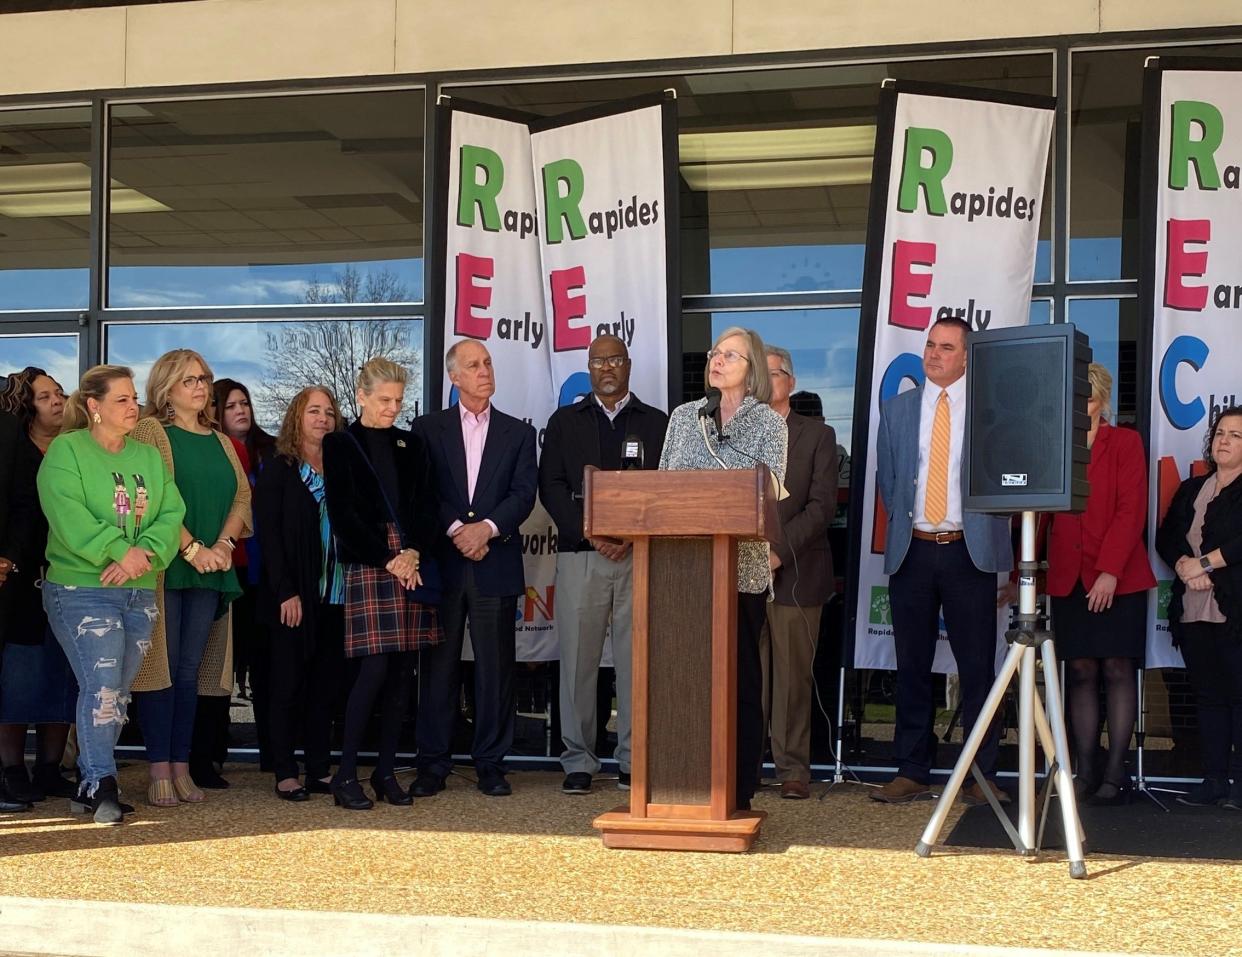 Cindy Rushing, the Rapides early childhood/Head Start director, said Rapides ranks sixth in the state for early childhood performance. Twenty-seven of the district's 69 early childhood sites are rated as excellent.